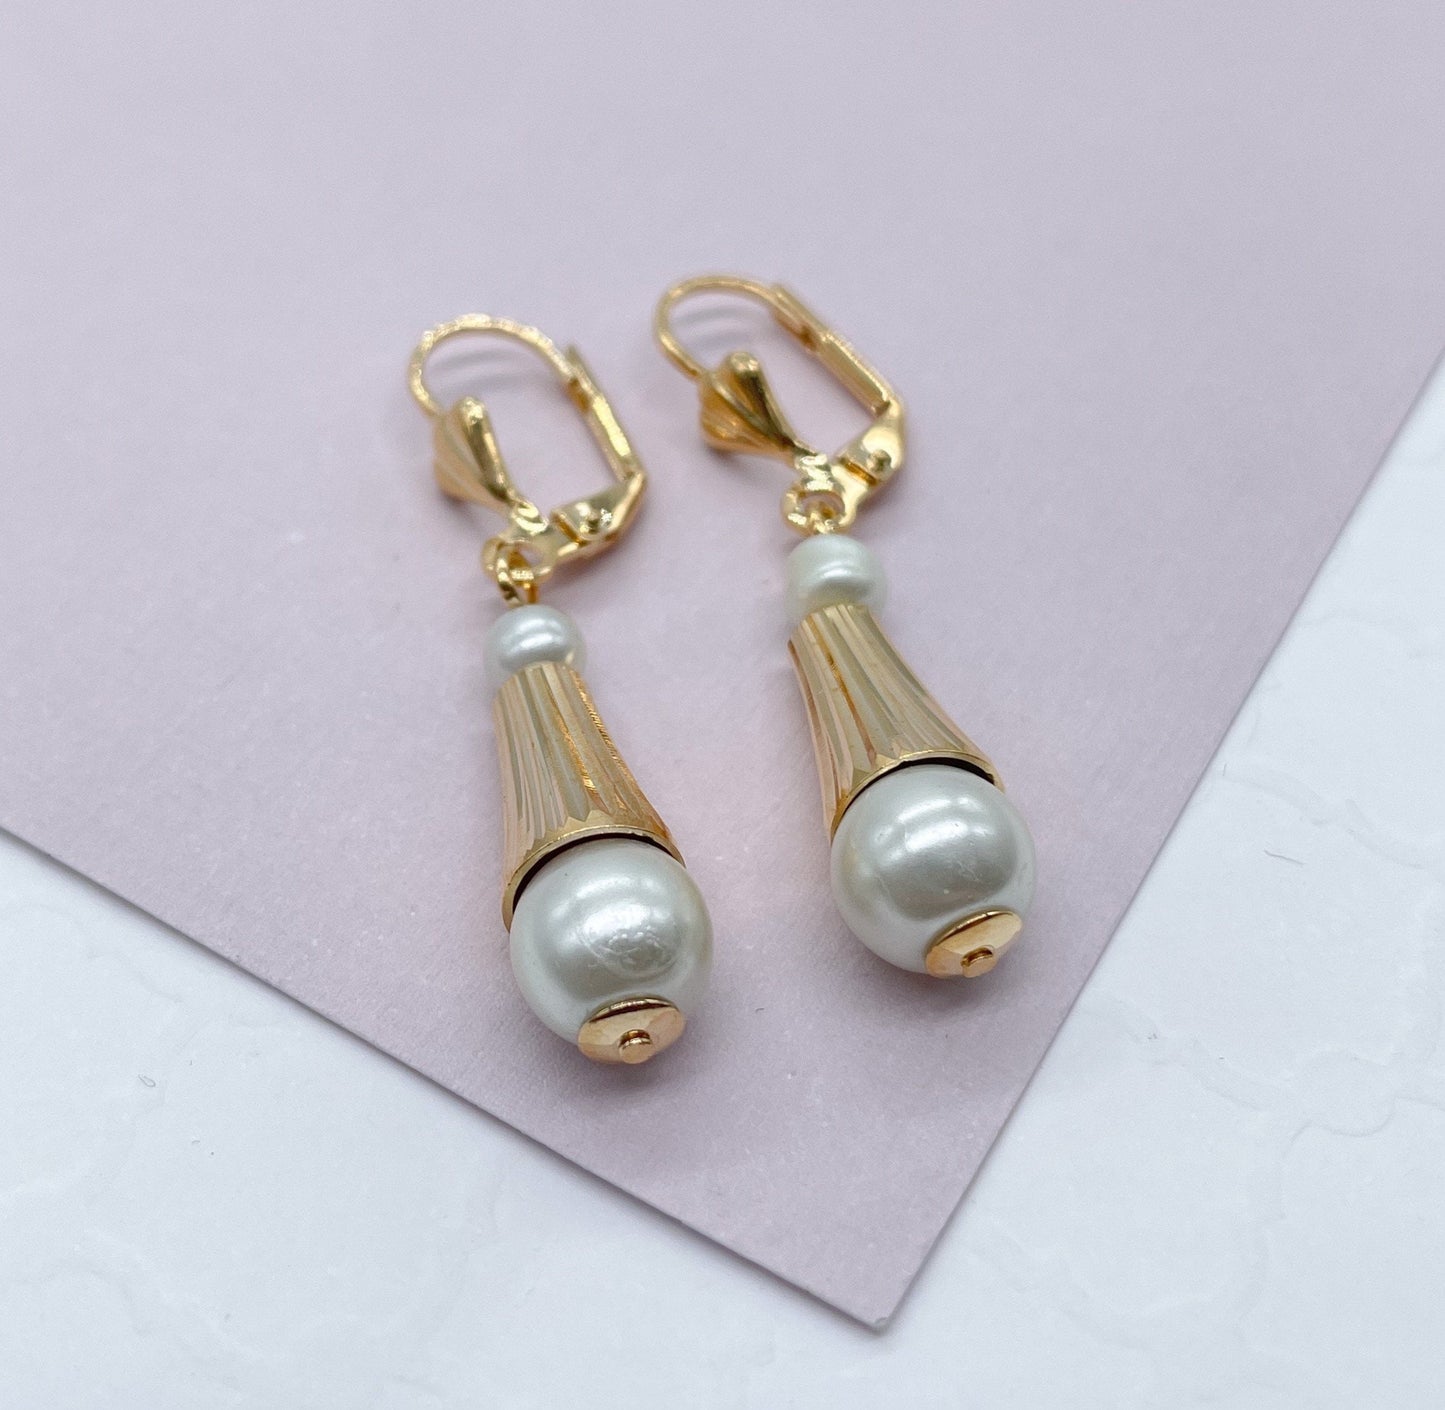 18k Gold Layered Dangling Earring With Simulated Pearl Ball Attached To The